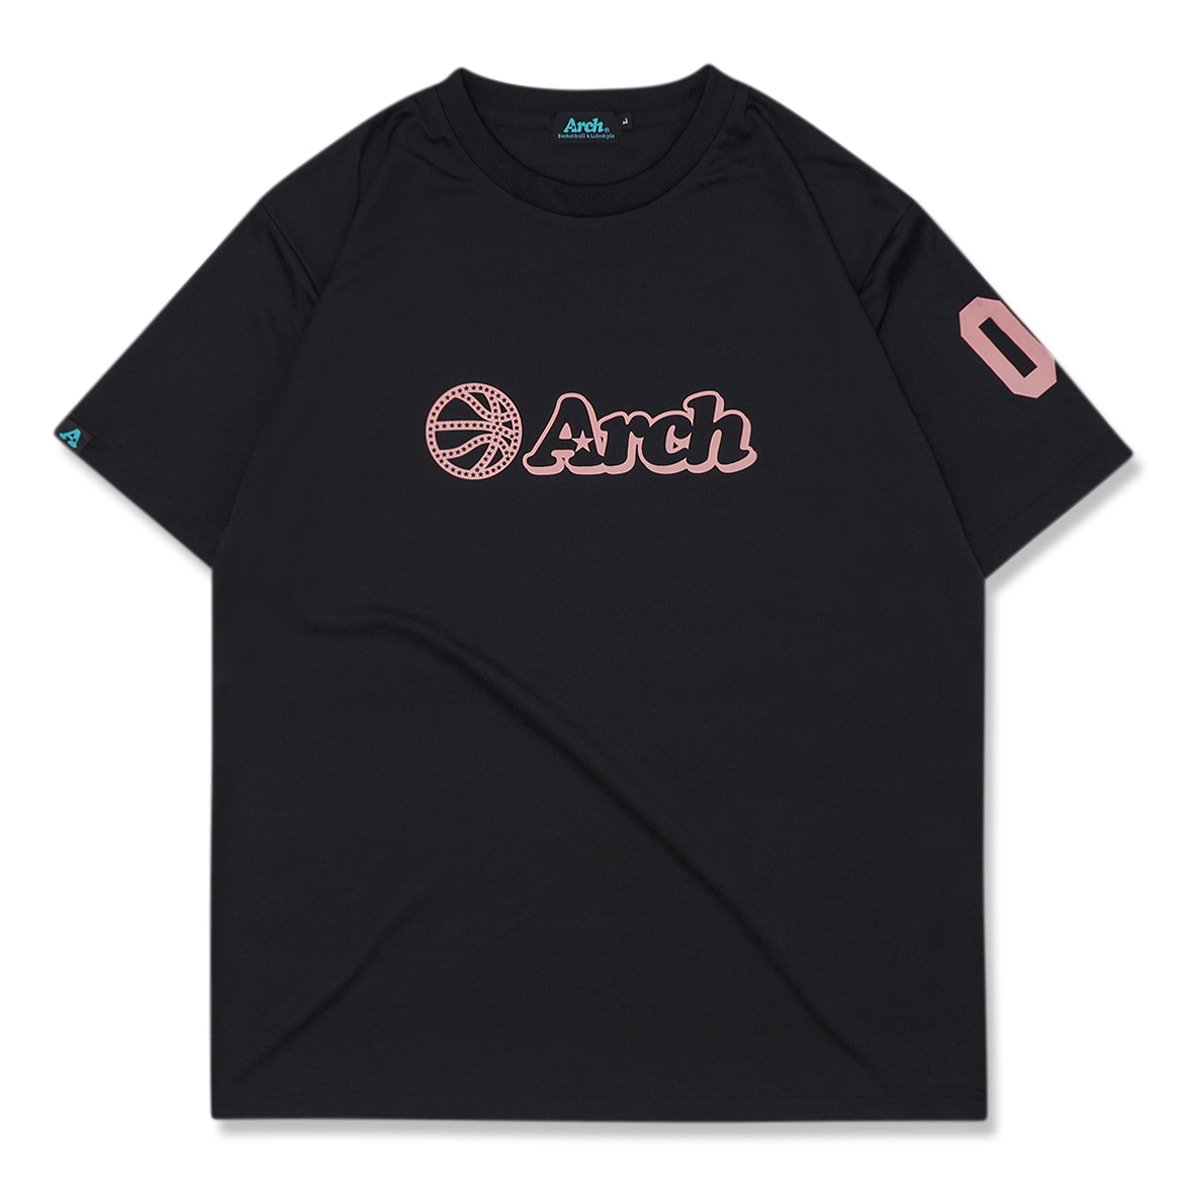 ball logo tee [DRY]【black/pink beige】 - Arch ☆ アーチ 